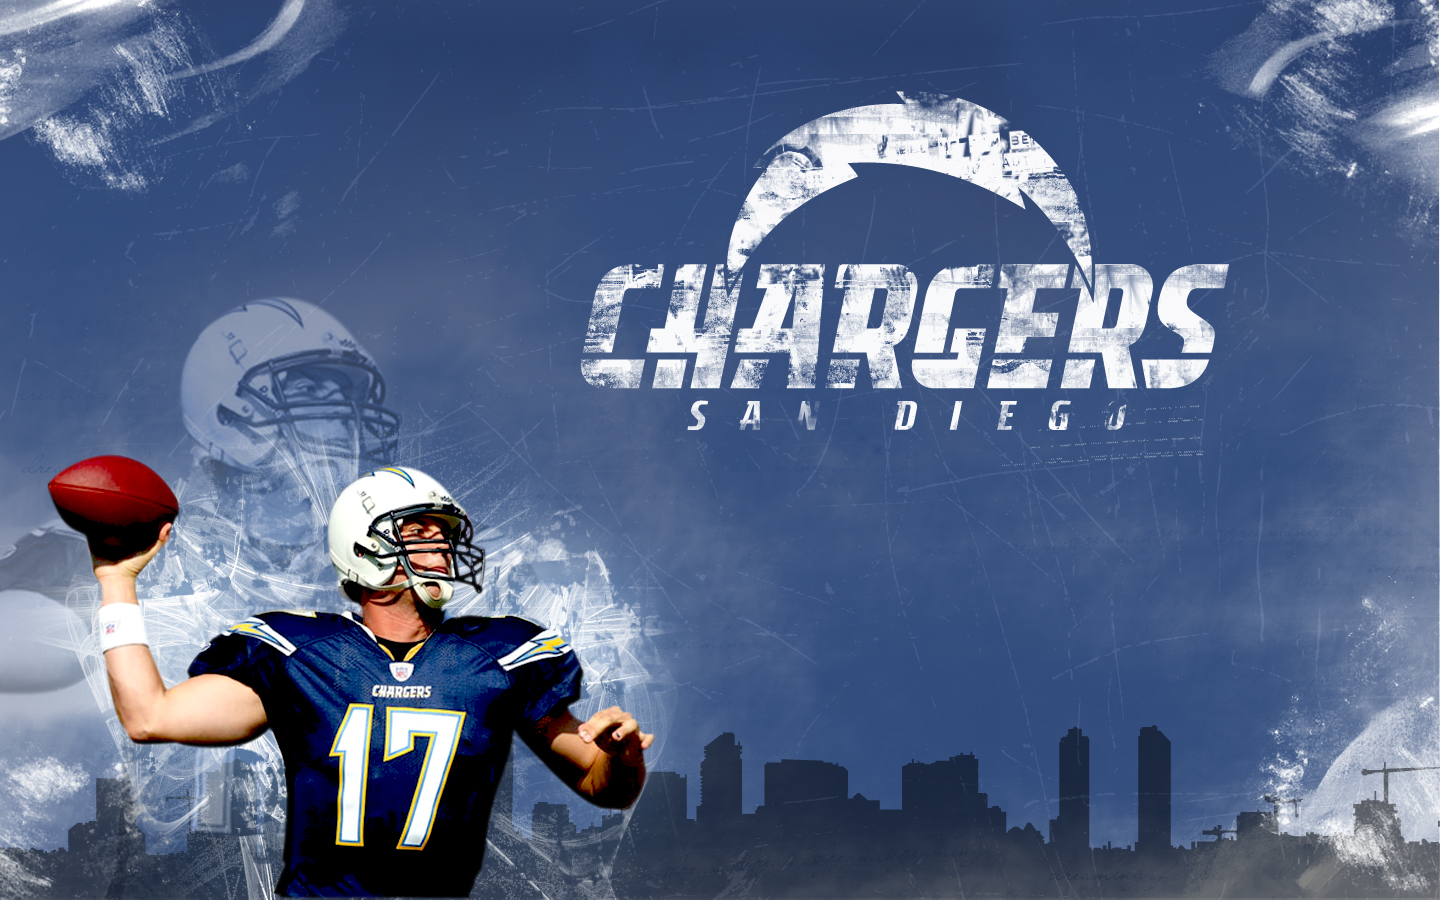 San Diego Chargers Wallpapers HD Wallpapers Early